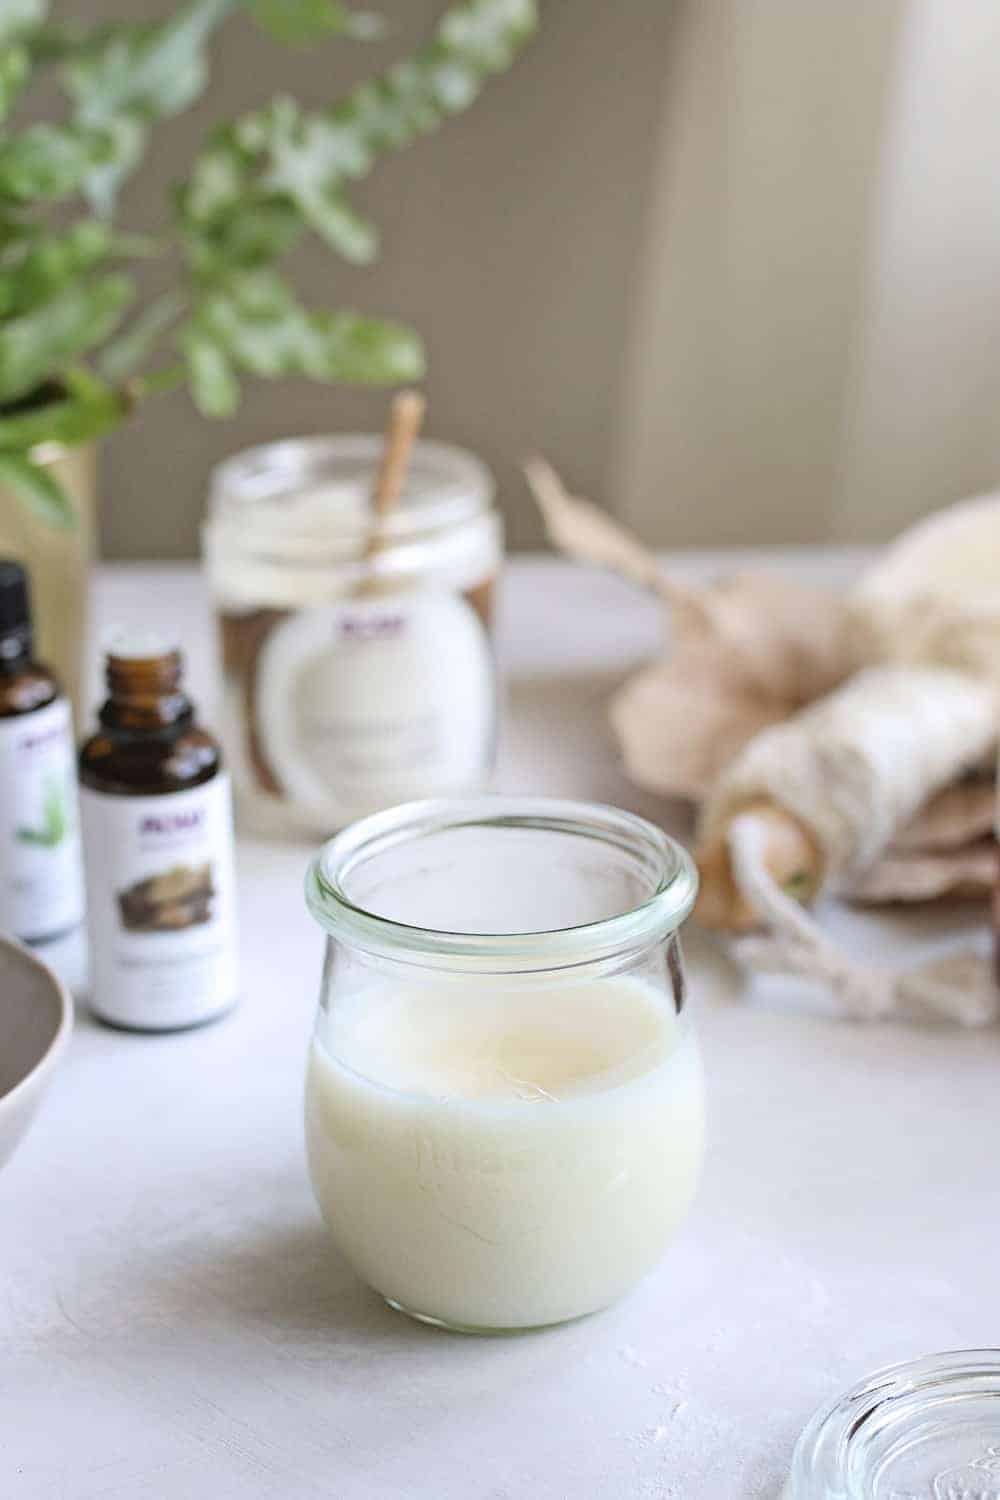 A Woodsy DIY Deodorant That Smells Amazing (+ Actually Works!)